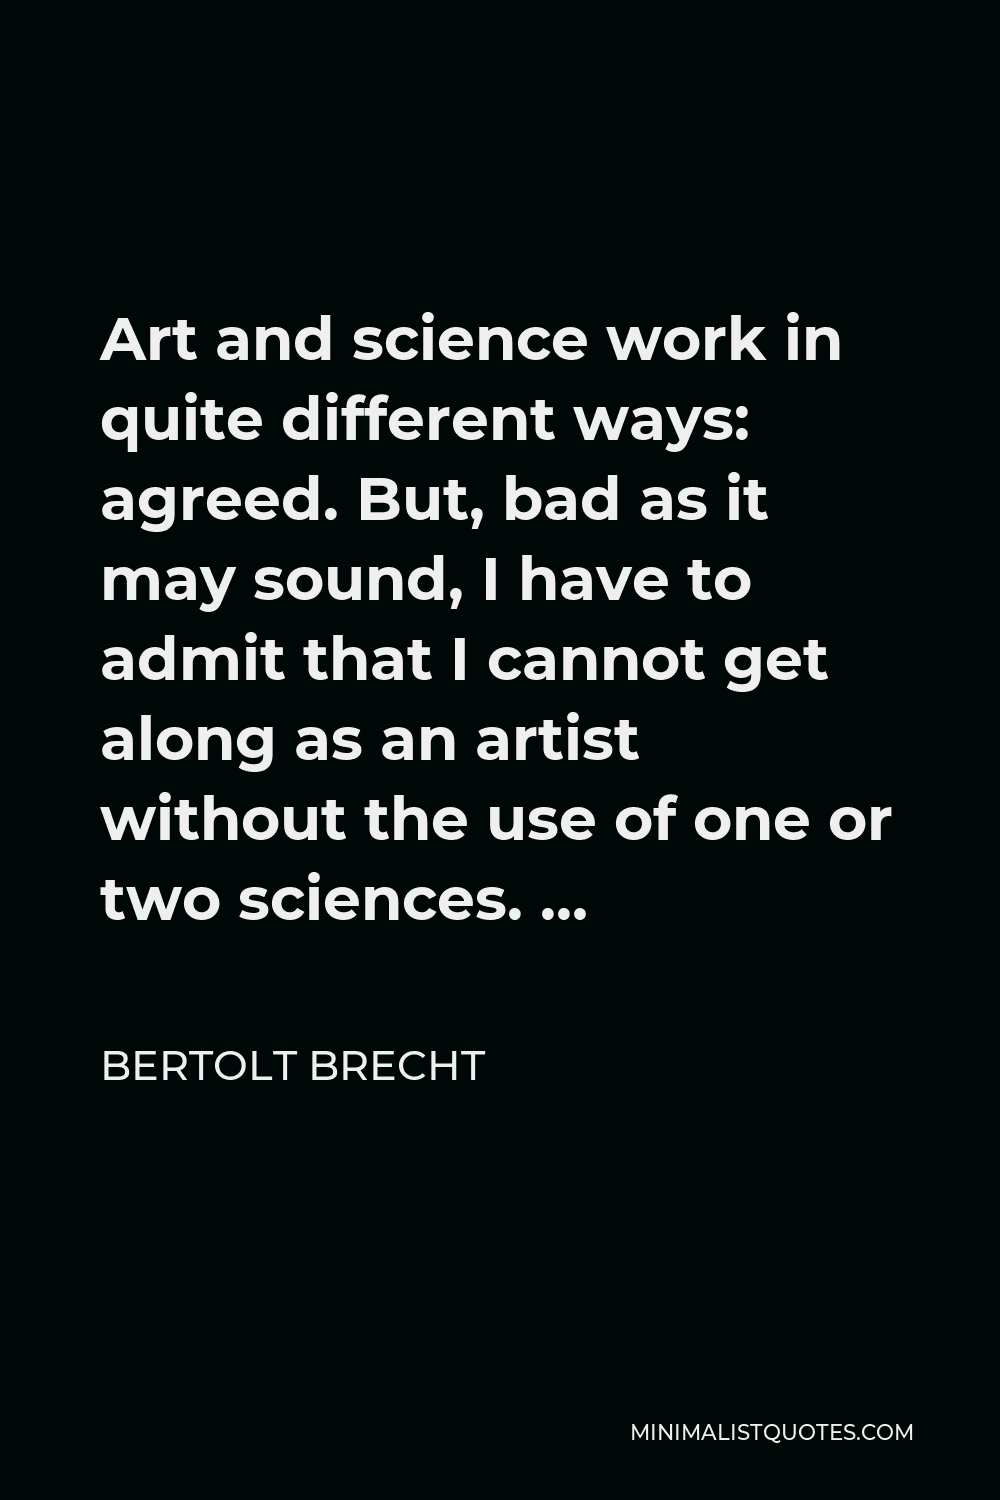 Bertolt Brecht Quote - Art and science work in quite different ways: agreed. But, bad as it may sound, I have to admit that I cannot get along as an artist without the use of one or two sciences. …